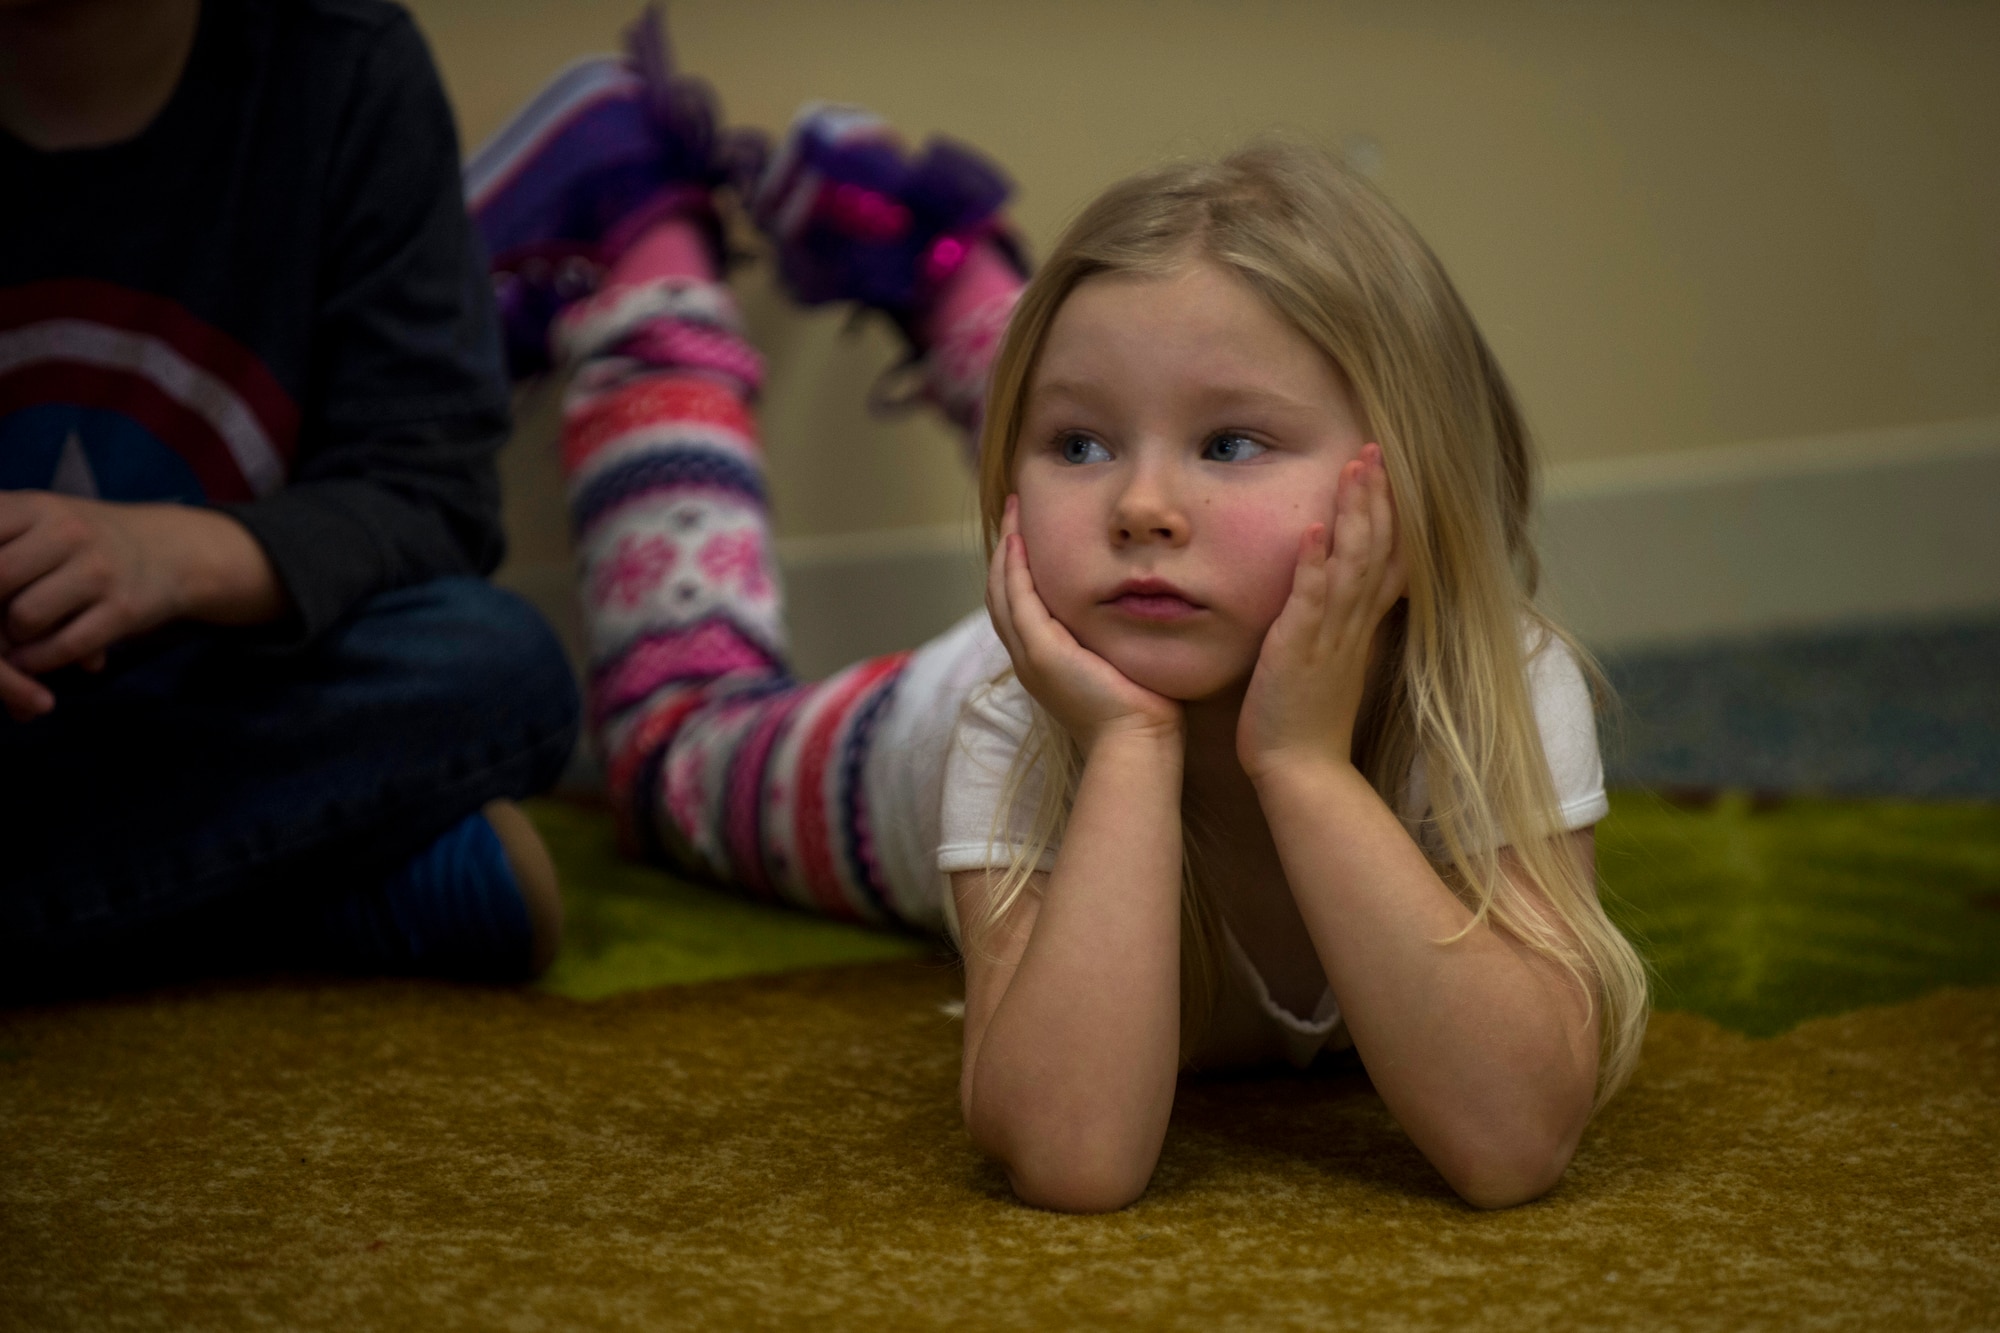 A child listens during the third annual Dr. Martin Luther King Jr. ‘Reading Is A Civil Right’ reading drive at the Child Development Center on Spangdahlem Air Base, Germany, Jan. 14, 2016. More than 40 volunteers read to children from Jan. 13-15 to promote early literacy among children ahead of the holiday weekend. (U.S. Air Force photo by Airman 1st Class Luke Kitterman/Released) 